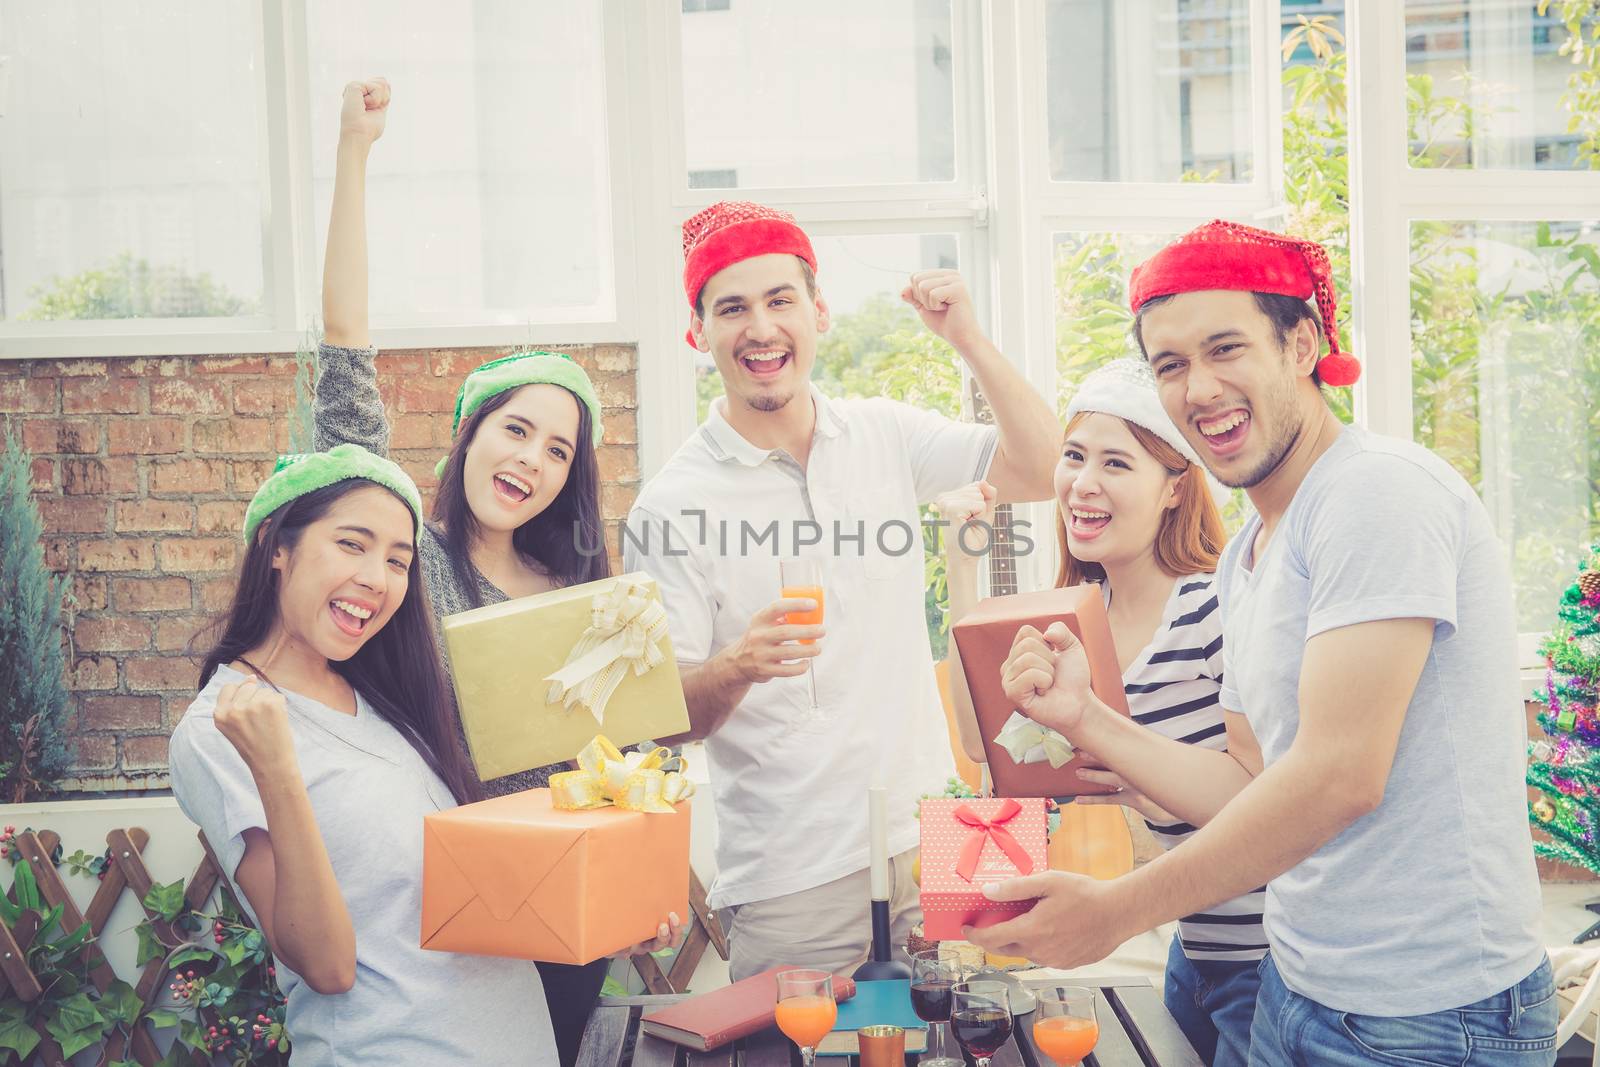 Asian group people man and woman giving gift box and celebration at party outdoor. group of friends social event with birthday achievement, success festive concept.